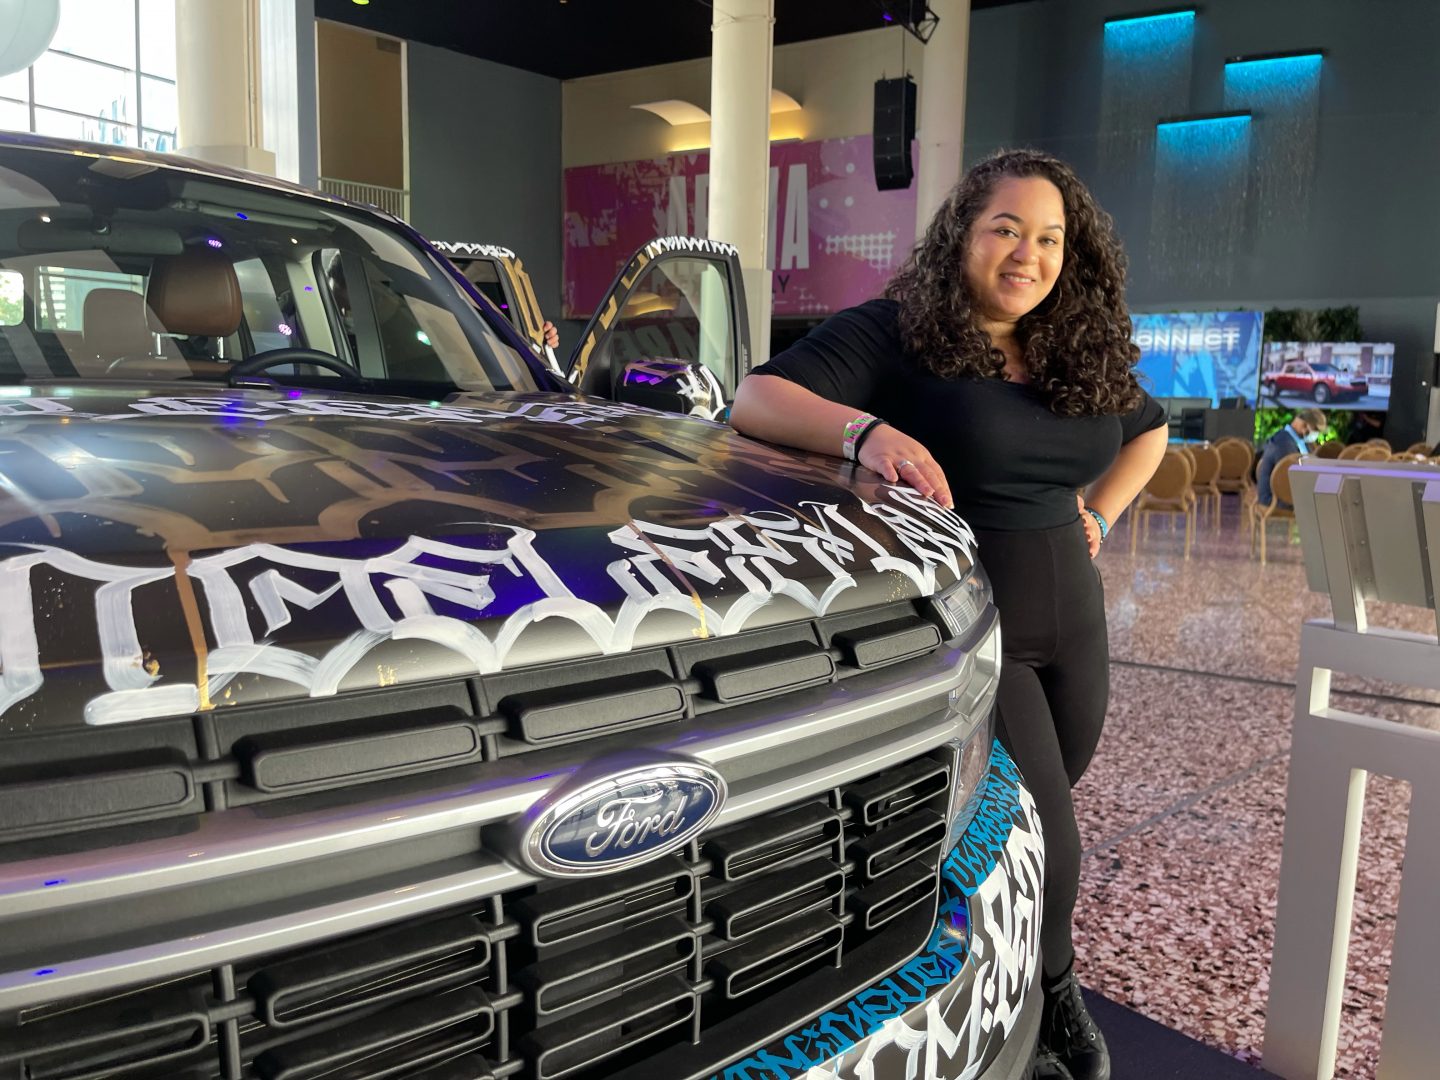 Ford's multicultural marketing manager Dee Guerrero discusses what it takes to be a Maverick and #BuiltFordTough